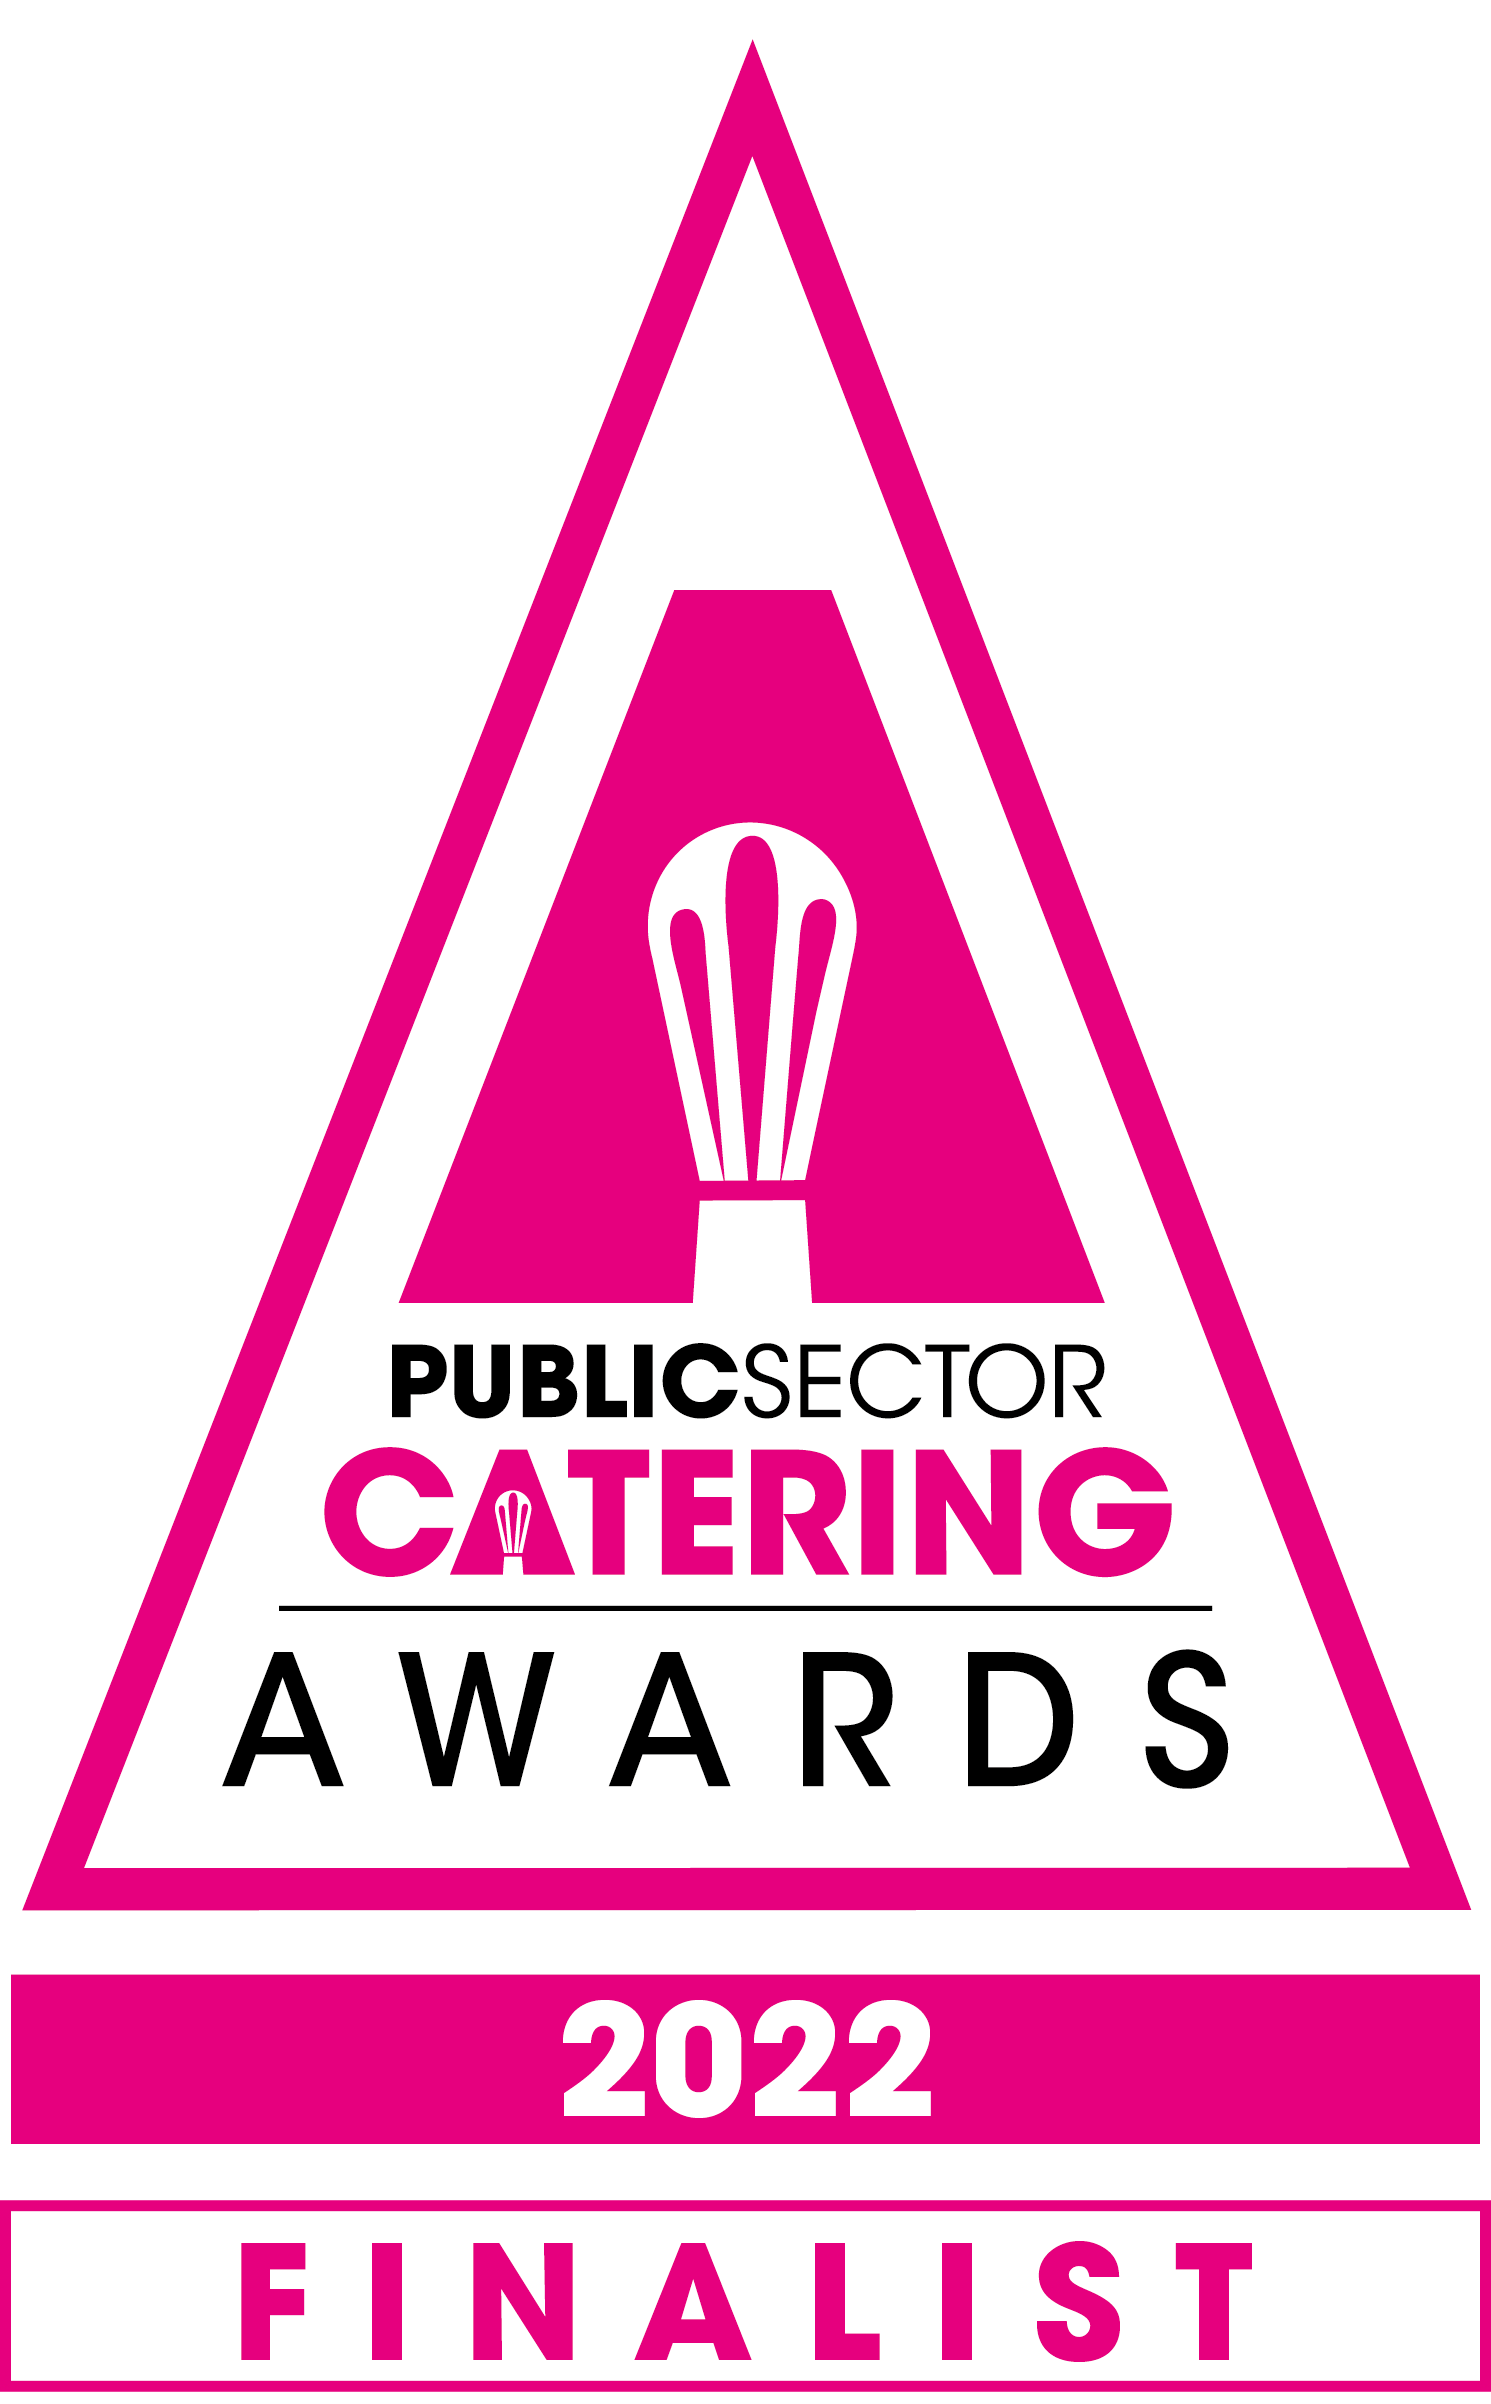 Public Sector Catering Awards 2022 finalists - Care Catering AND Chef of the Year